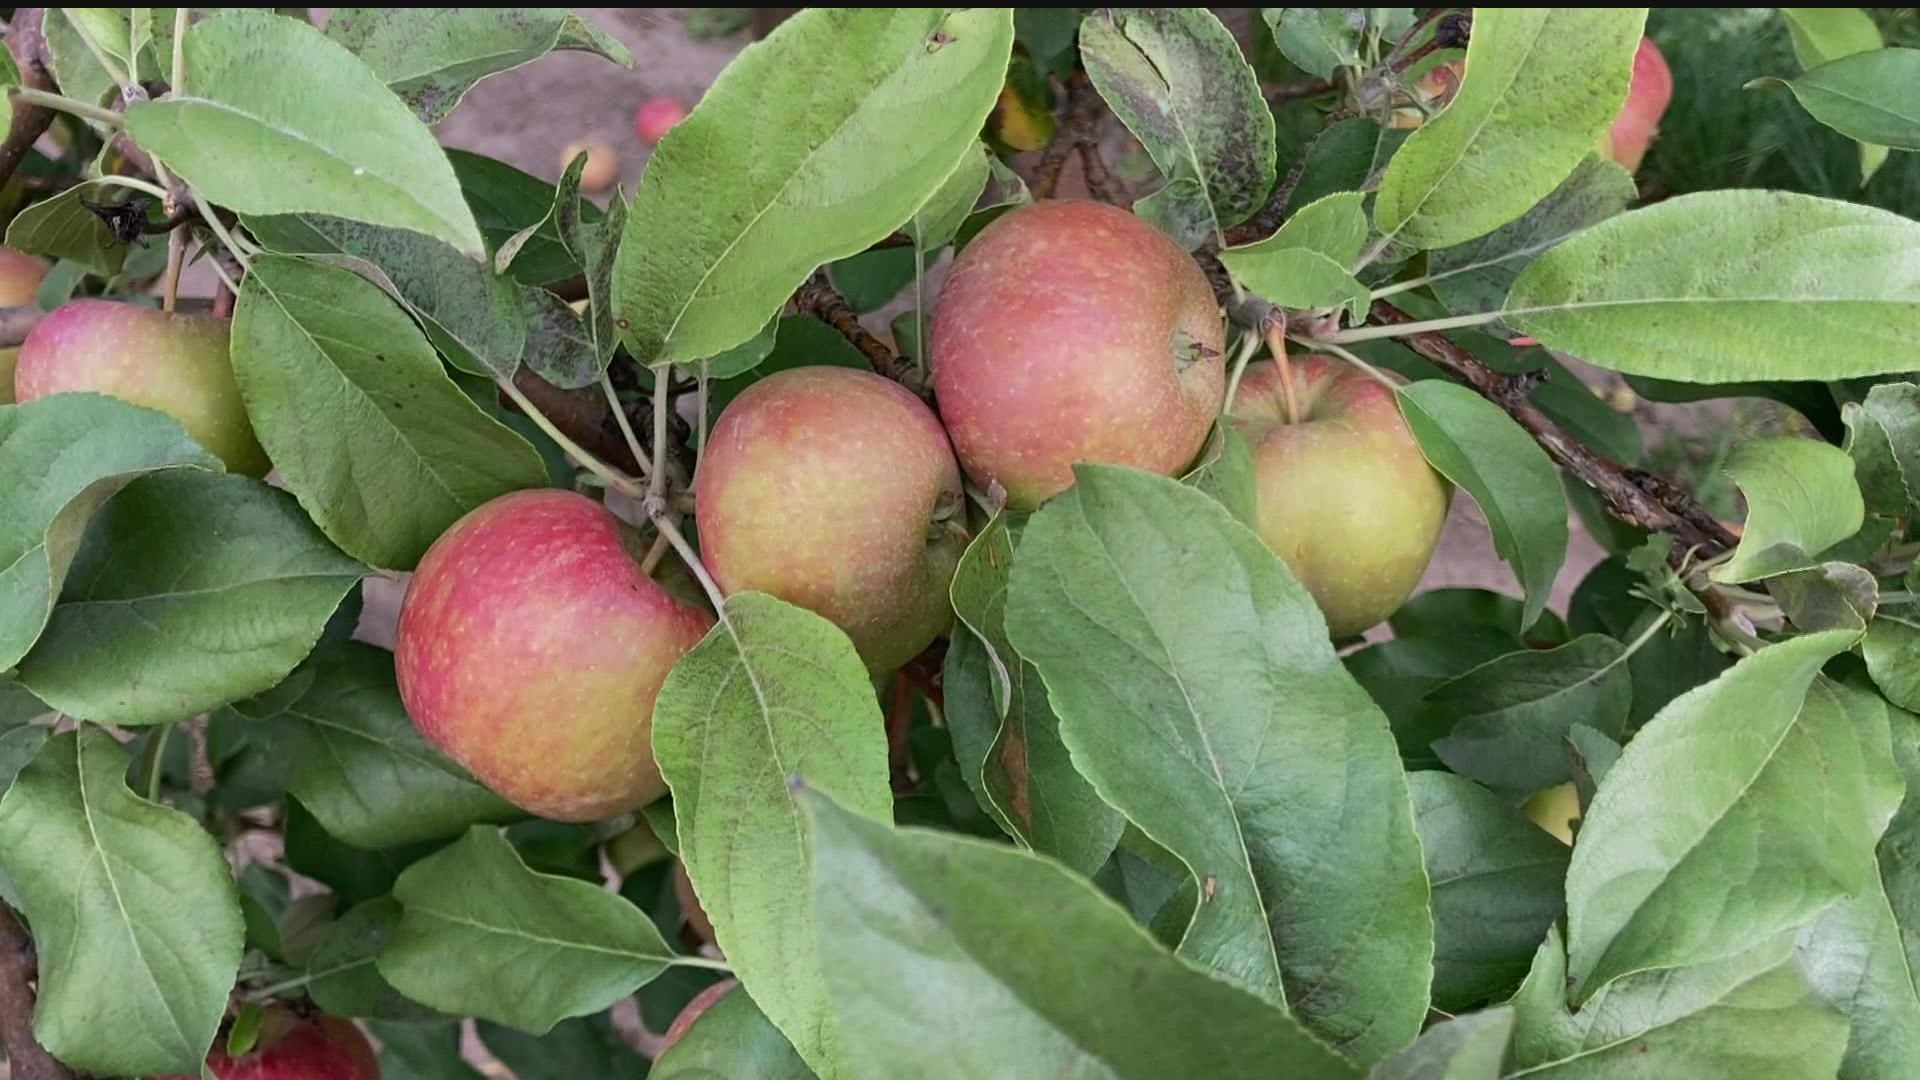 If there's too many apples, the leaves aren't able to produce enough sugar and you end up with poor quality fruit that just doesn't taste very good.